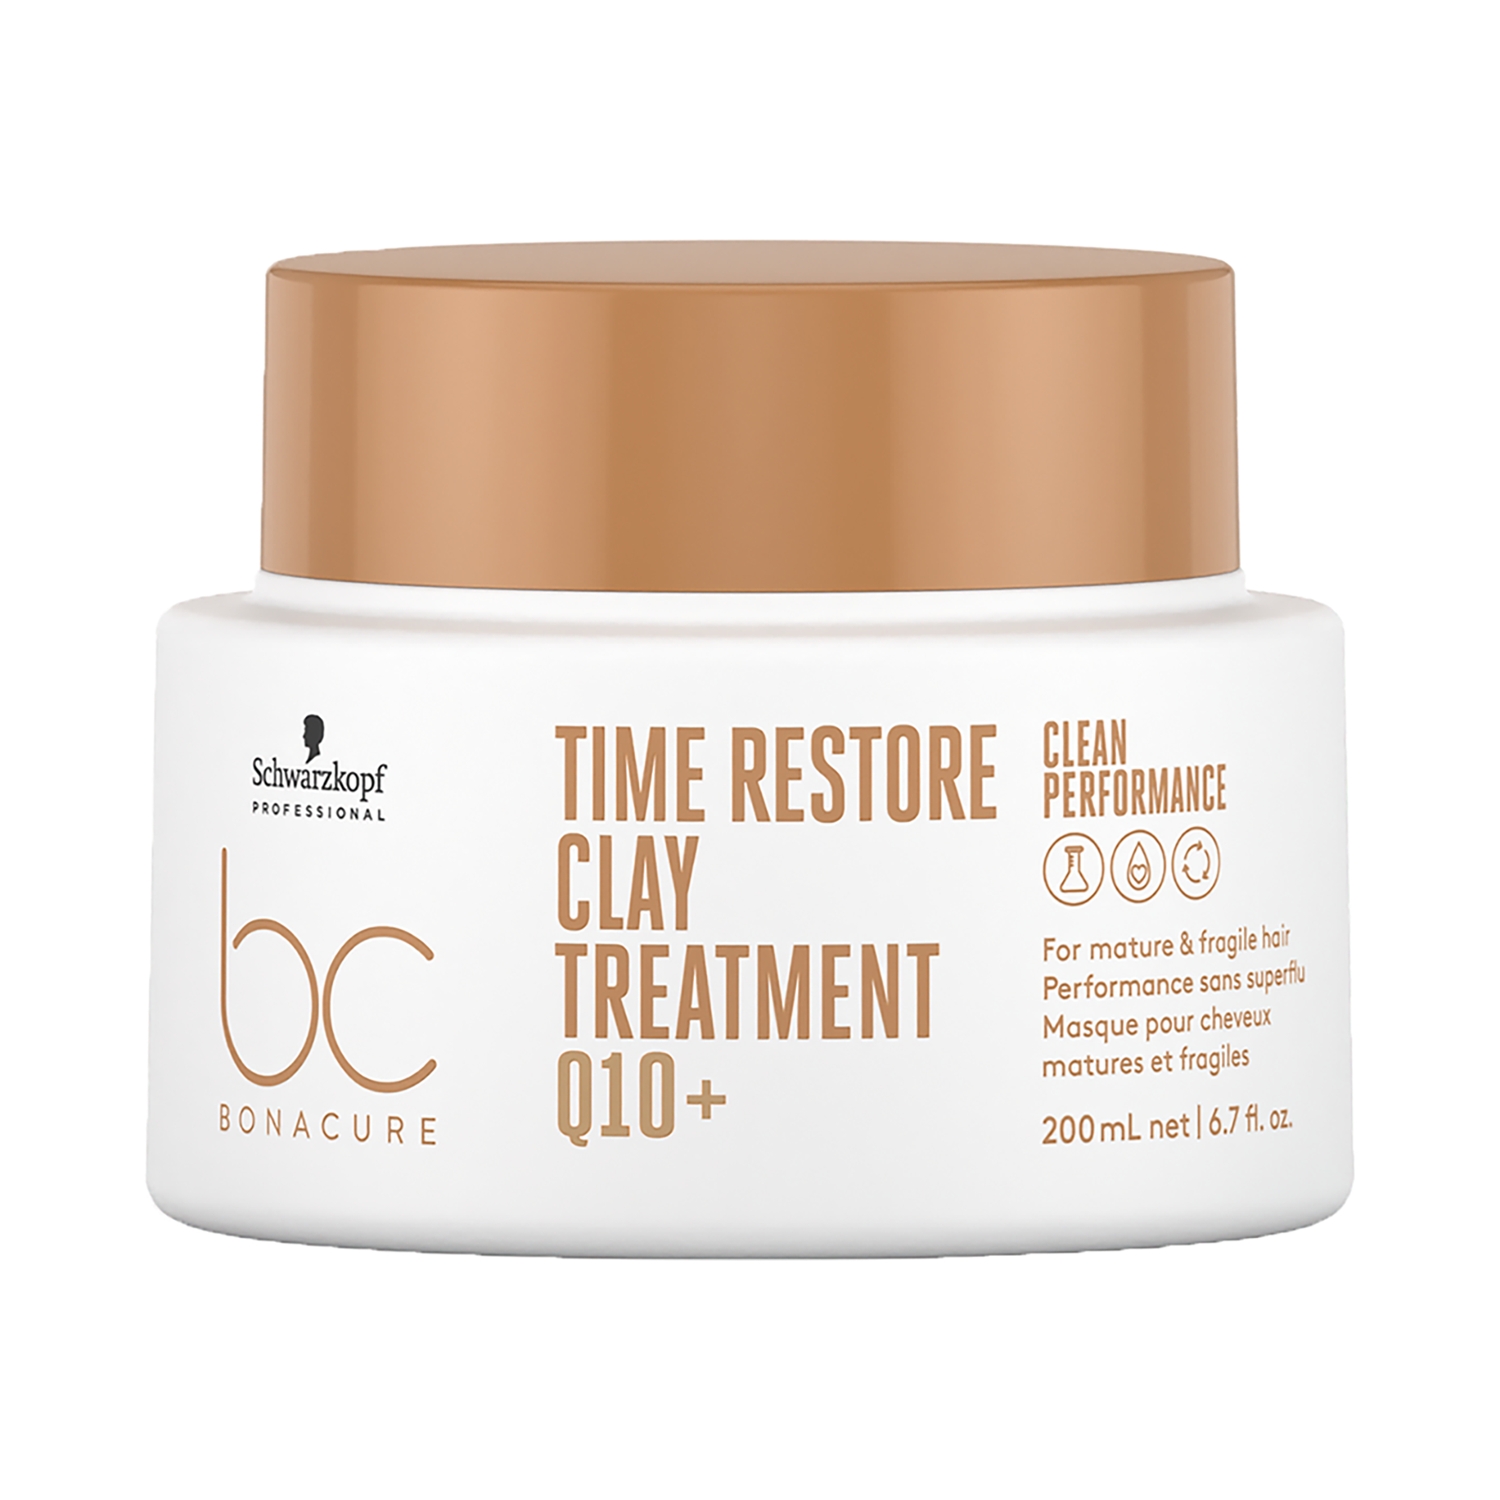 Schwarzkopf Professional Bonacure Time Restore Clay Treatment Mask With Q10+ (200ml)